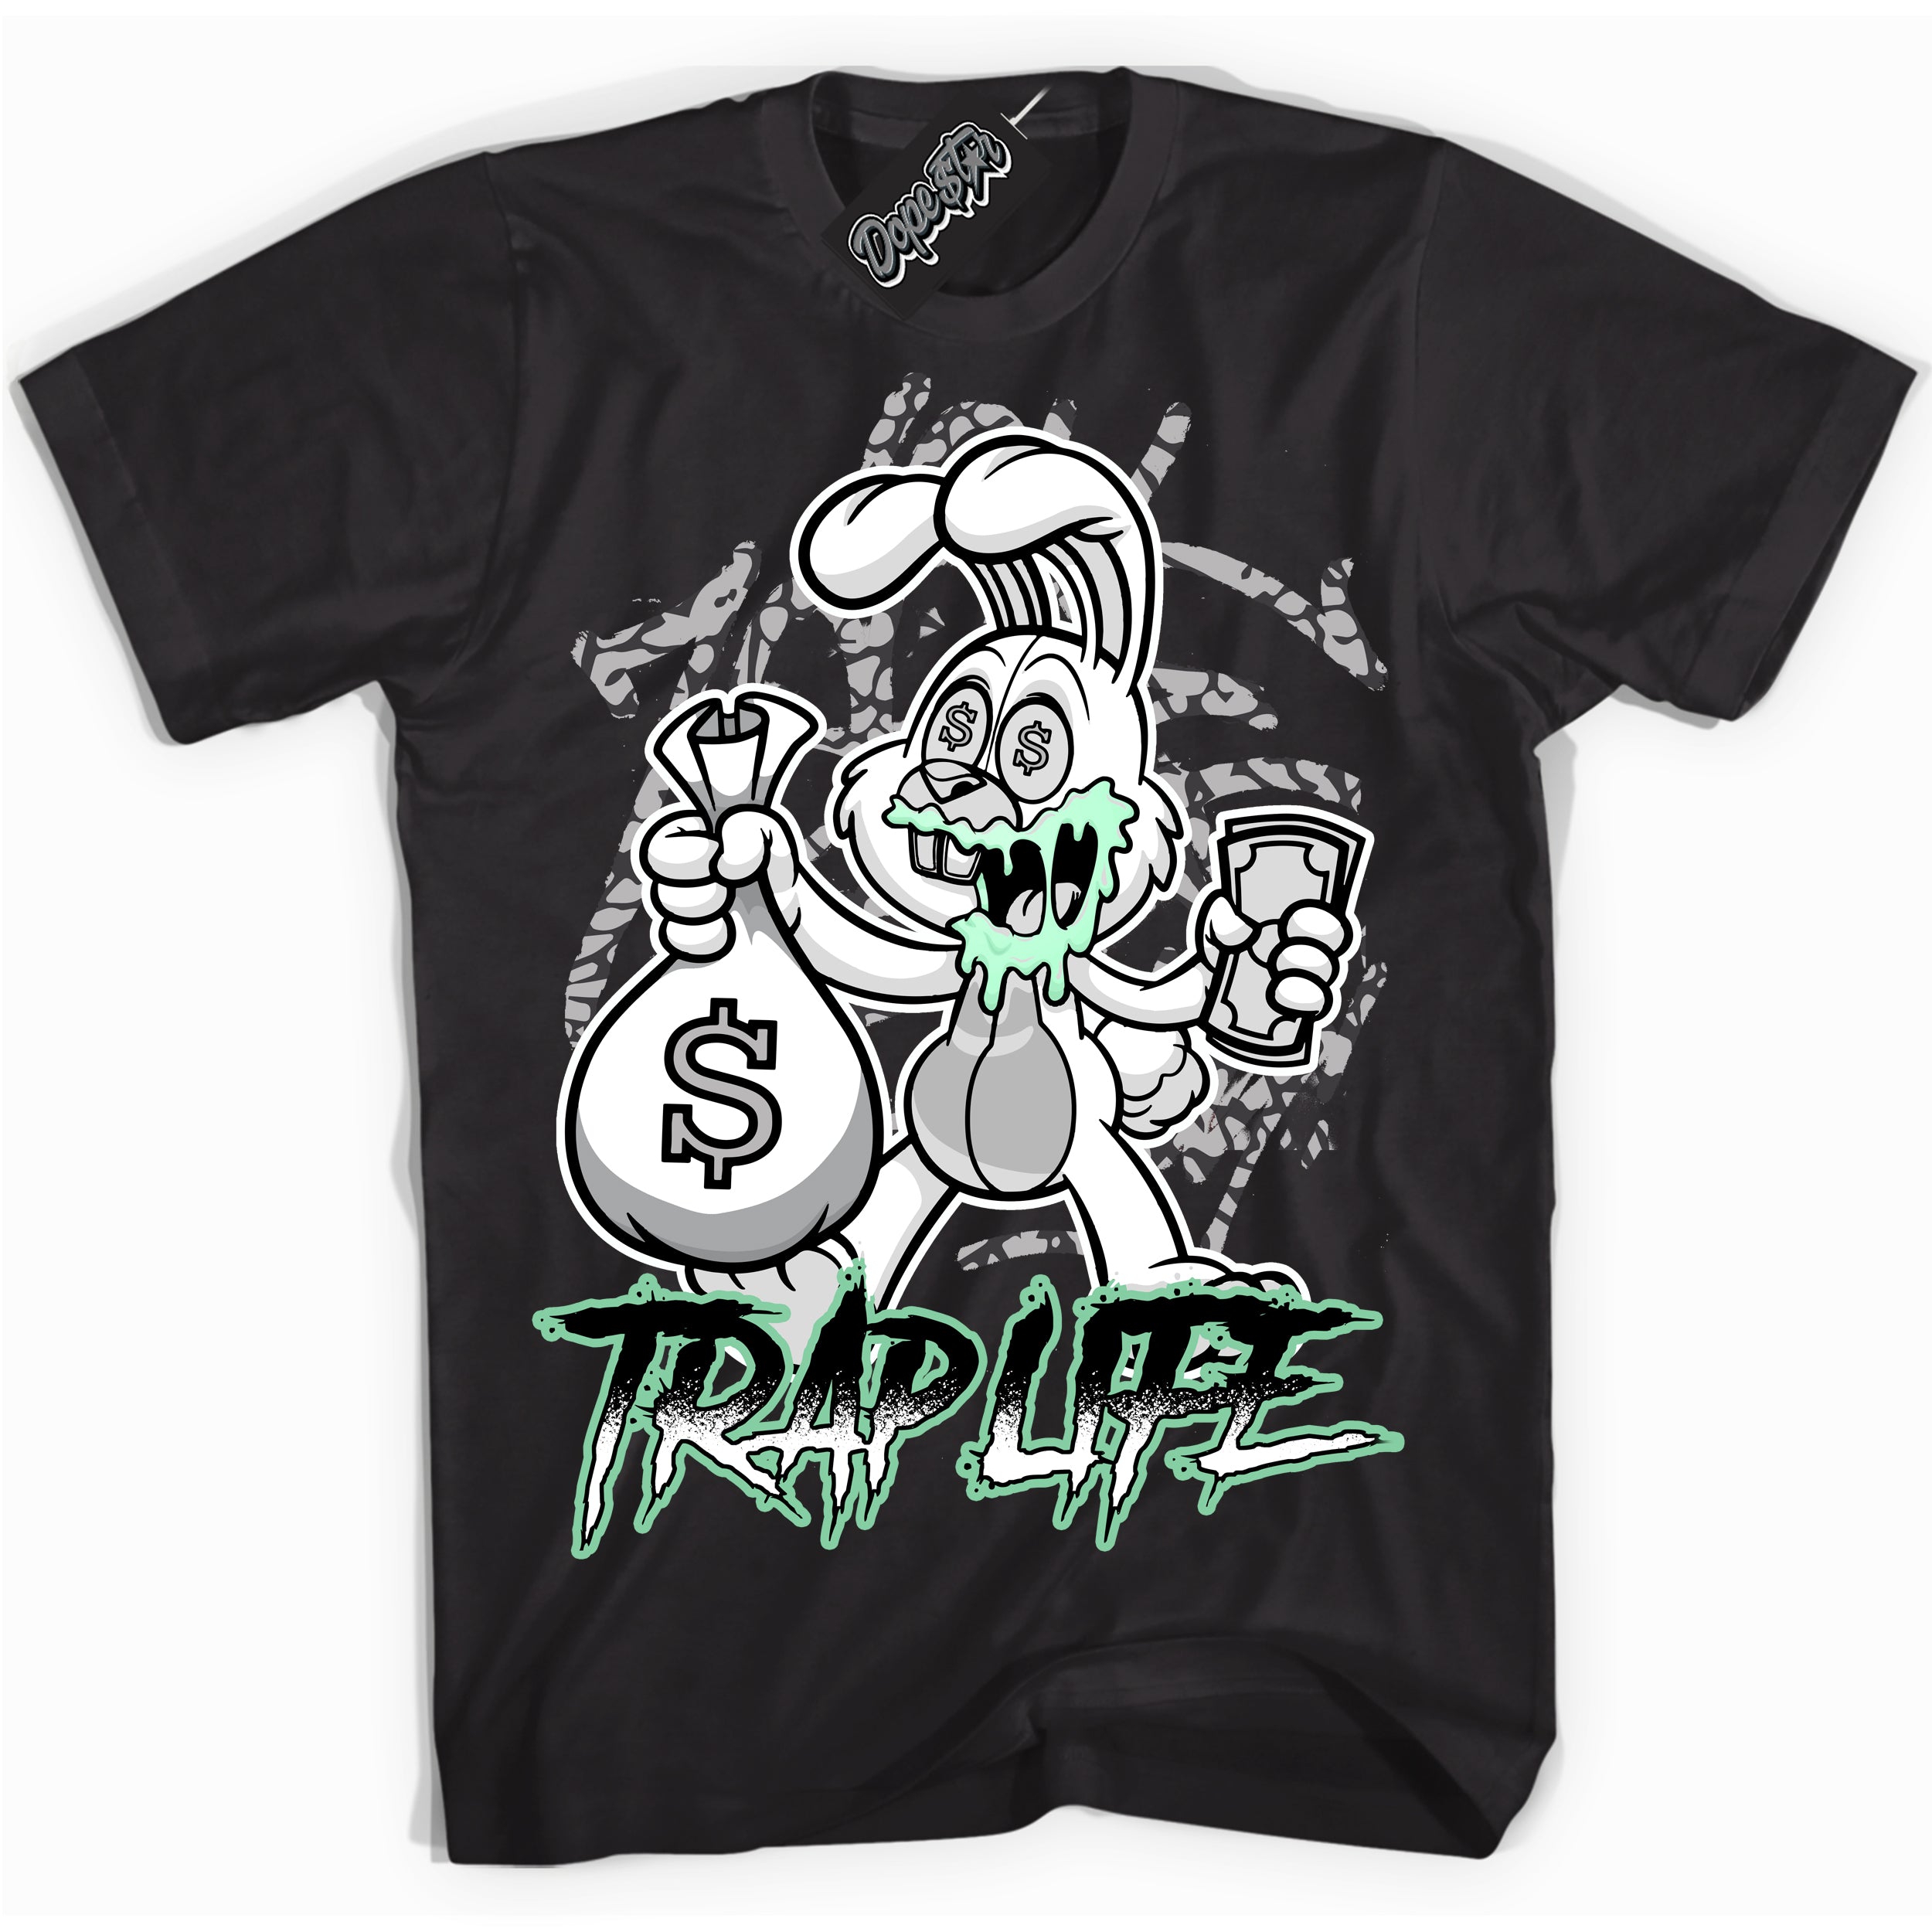 Cool Black graphic tee with “ Trap Rabbit ” design, that perfectly matches Green Glow 3s sneakers 